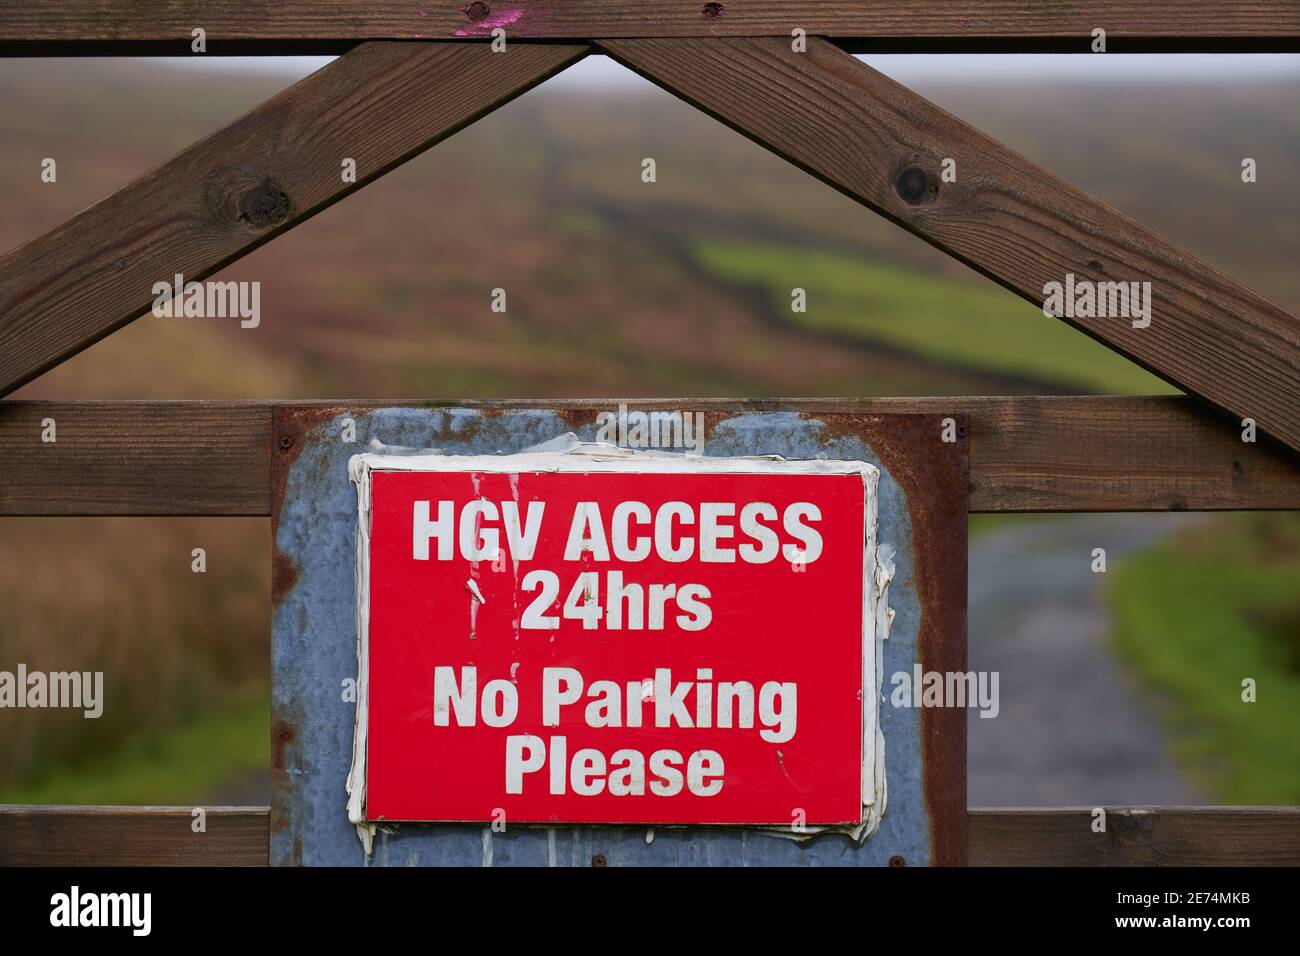 No parking warning sign on gate post HGV access 24hrs a day Stock Photo